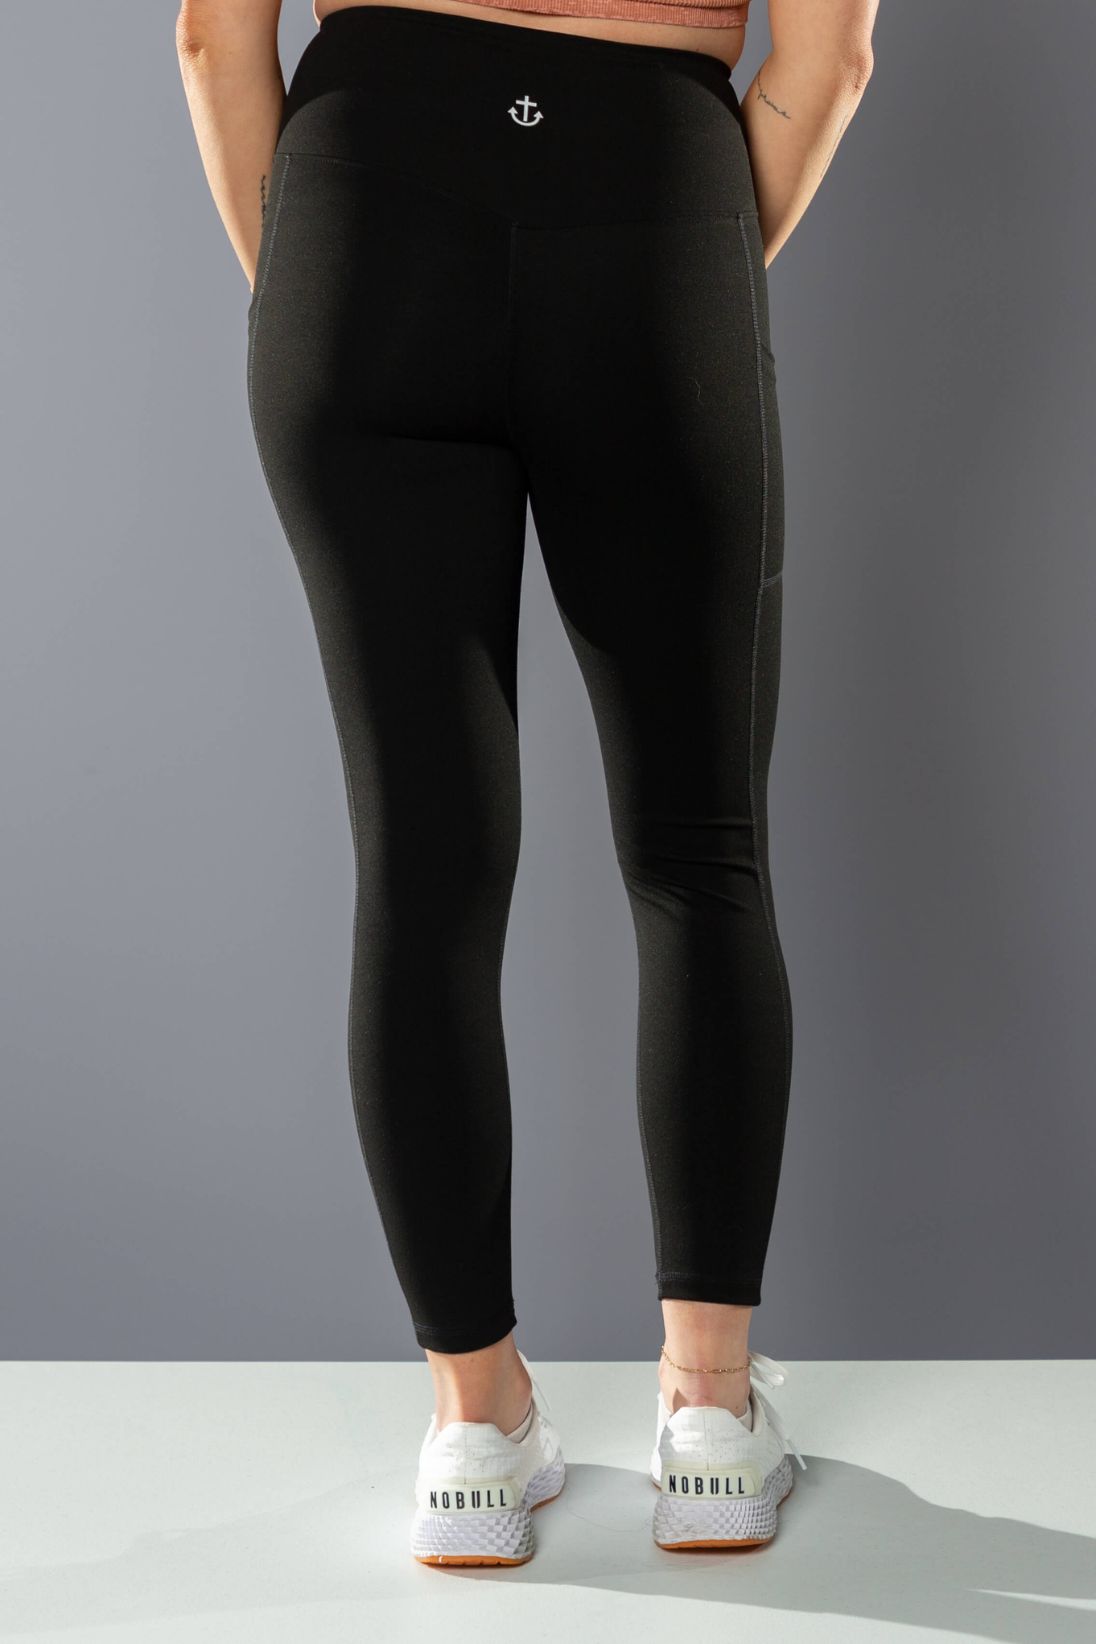 Black High-Waisted Athletic Leggings with Pockets